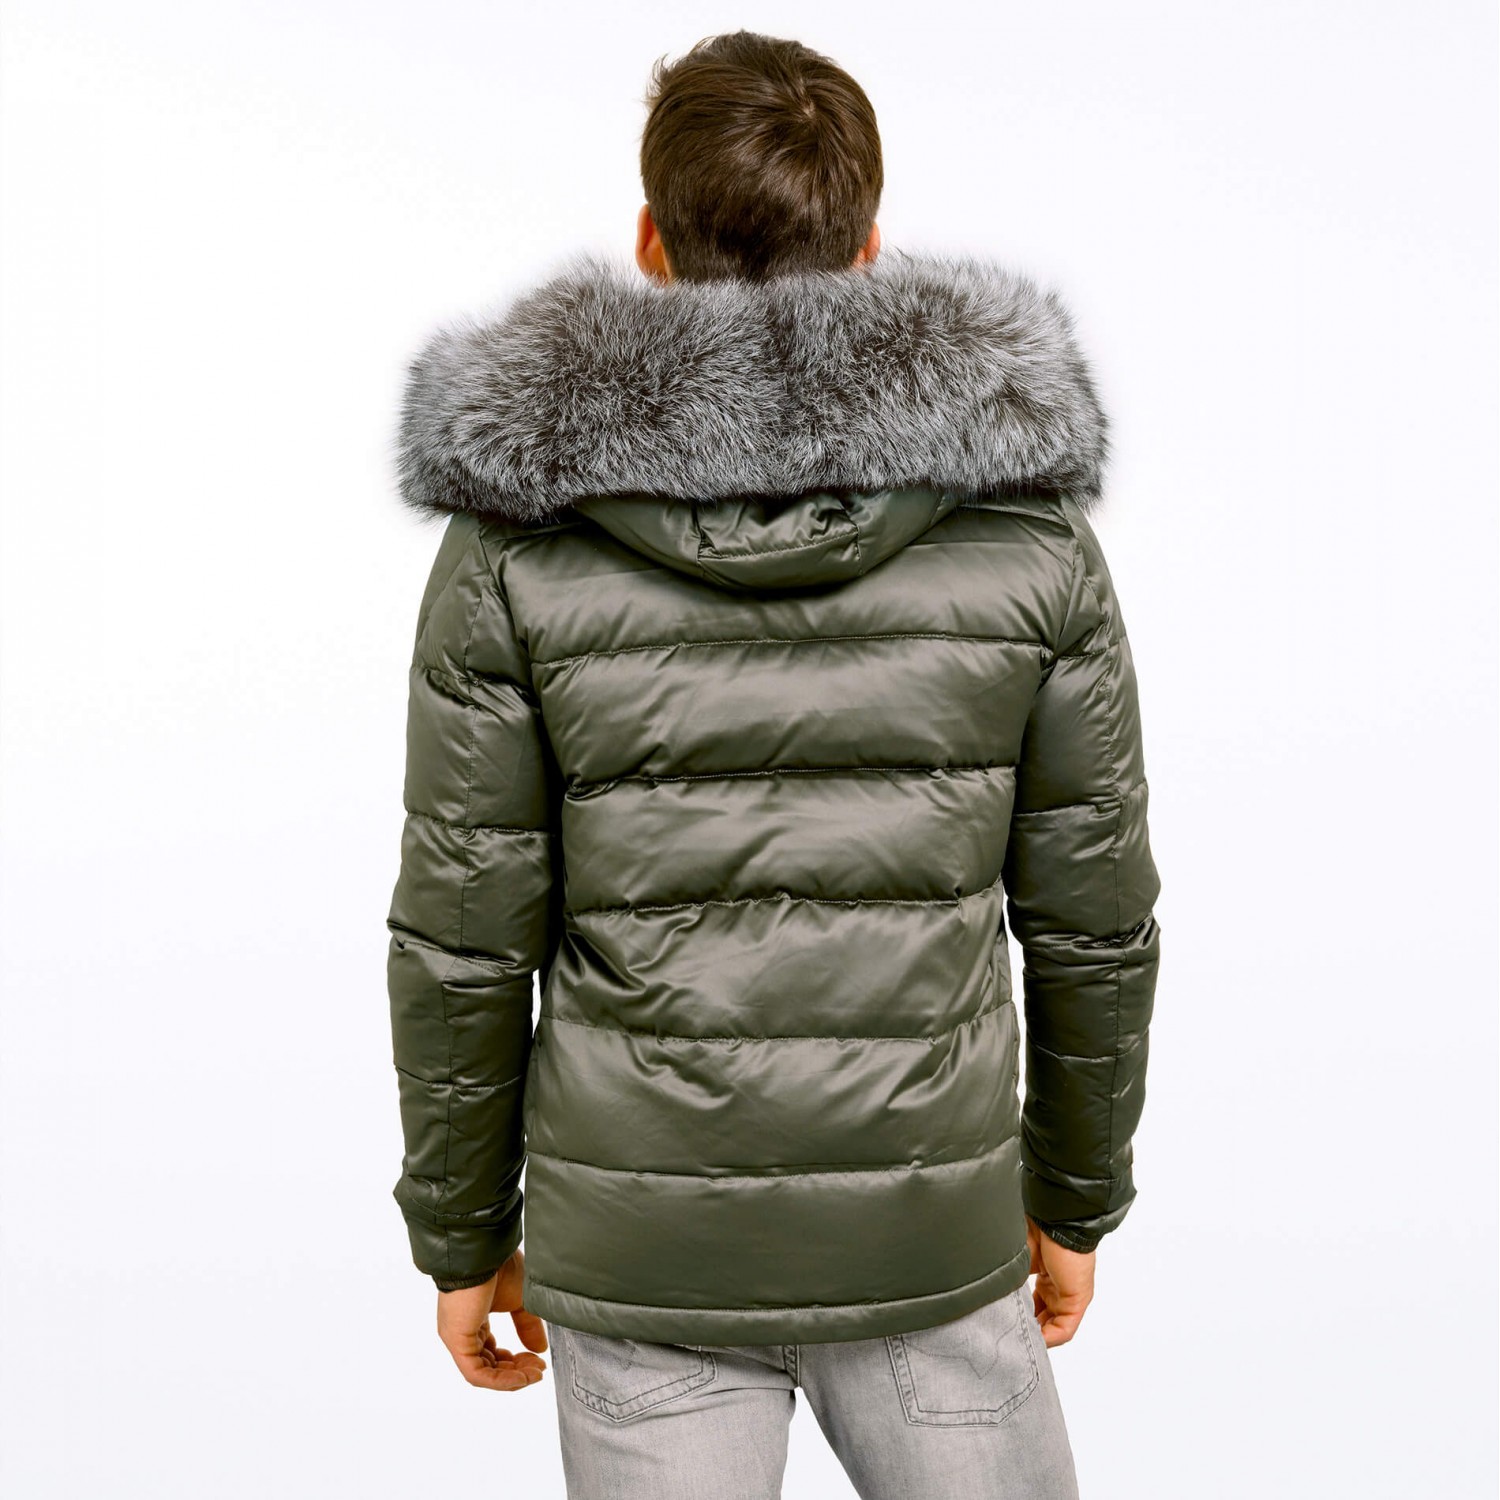 Mens puffer jacket with fur